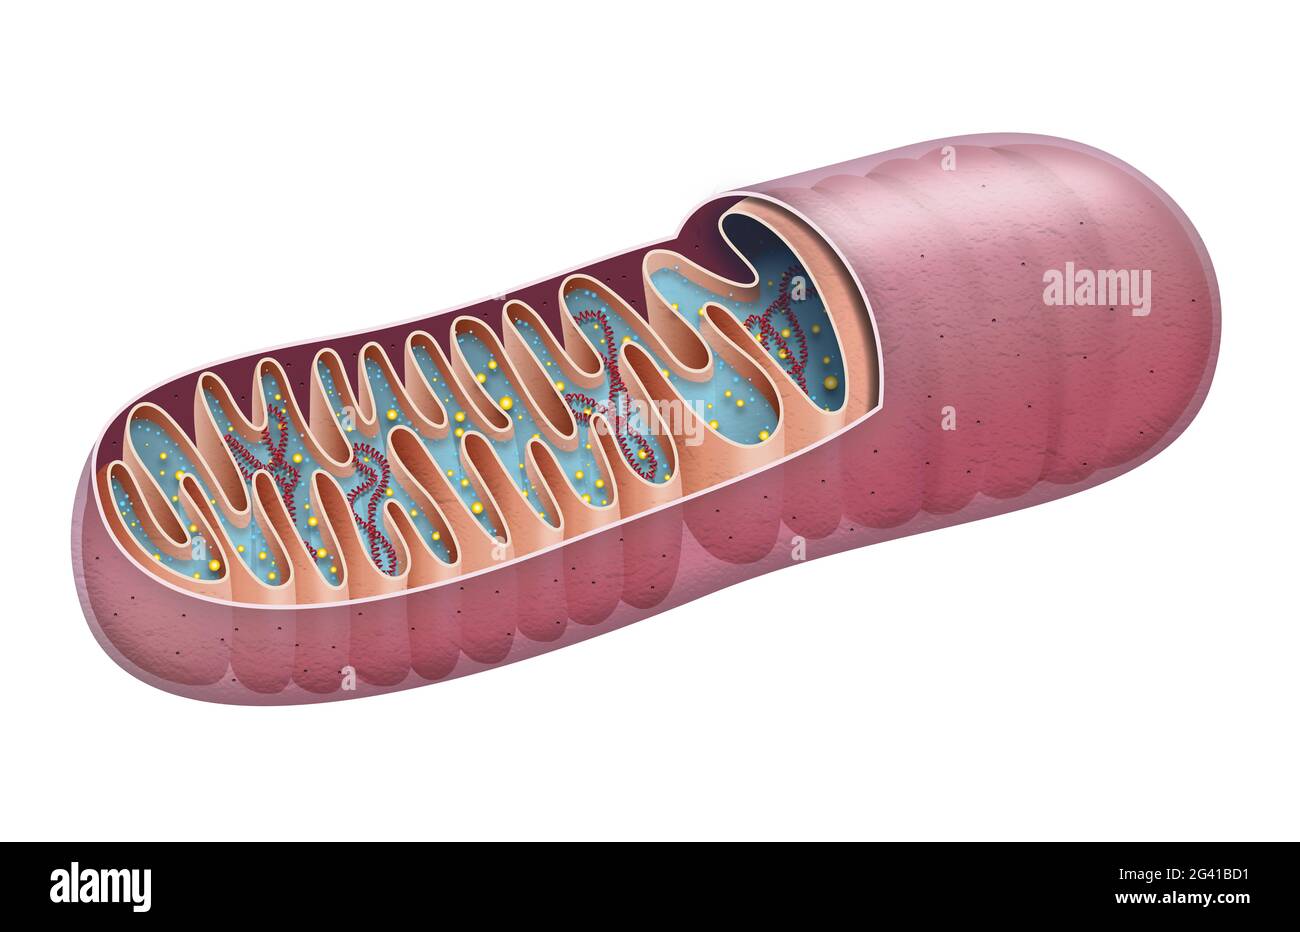 Section of mitochondria Stock Photo